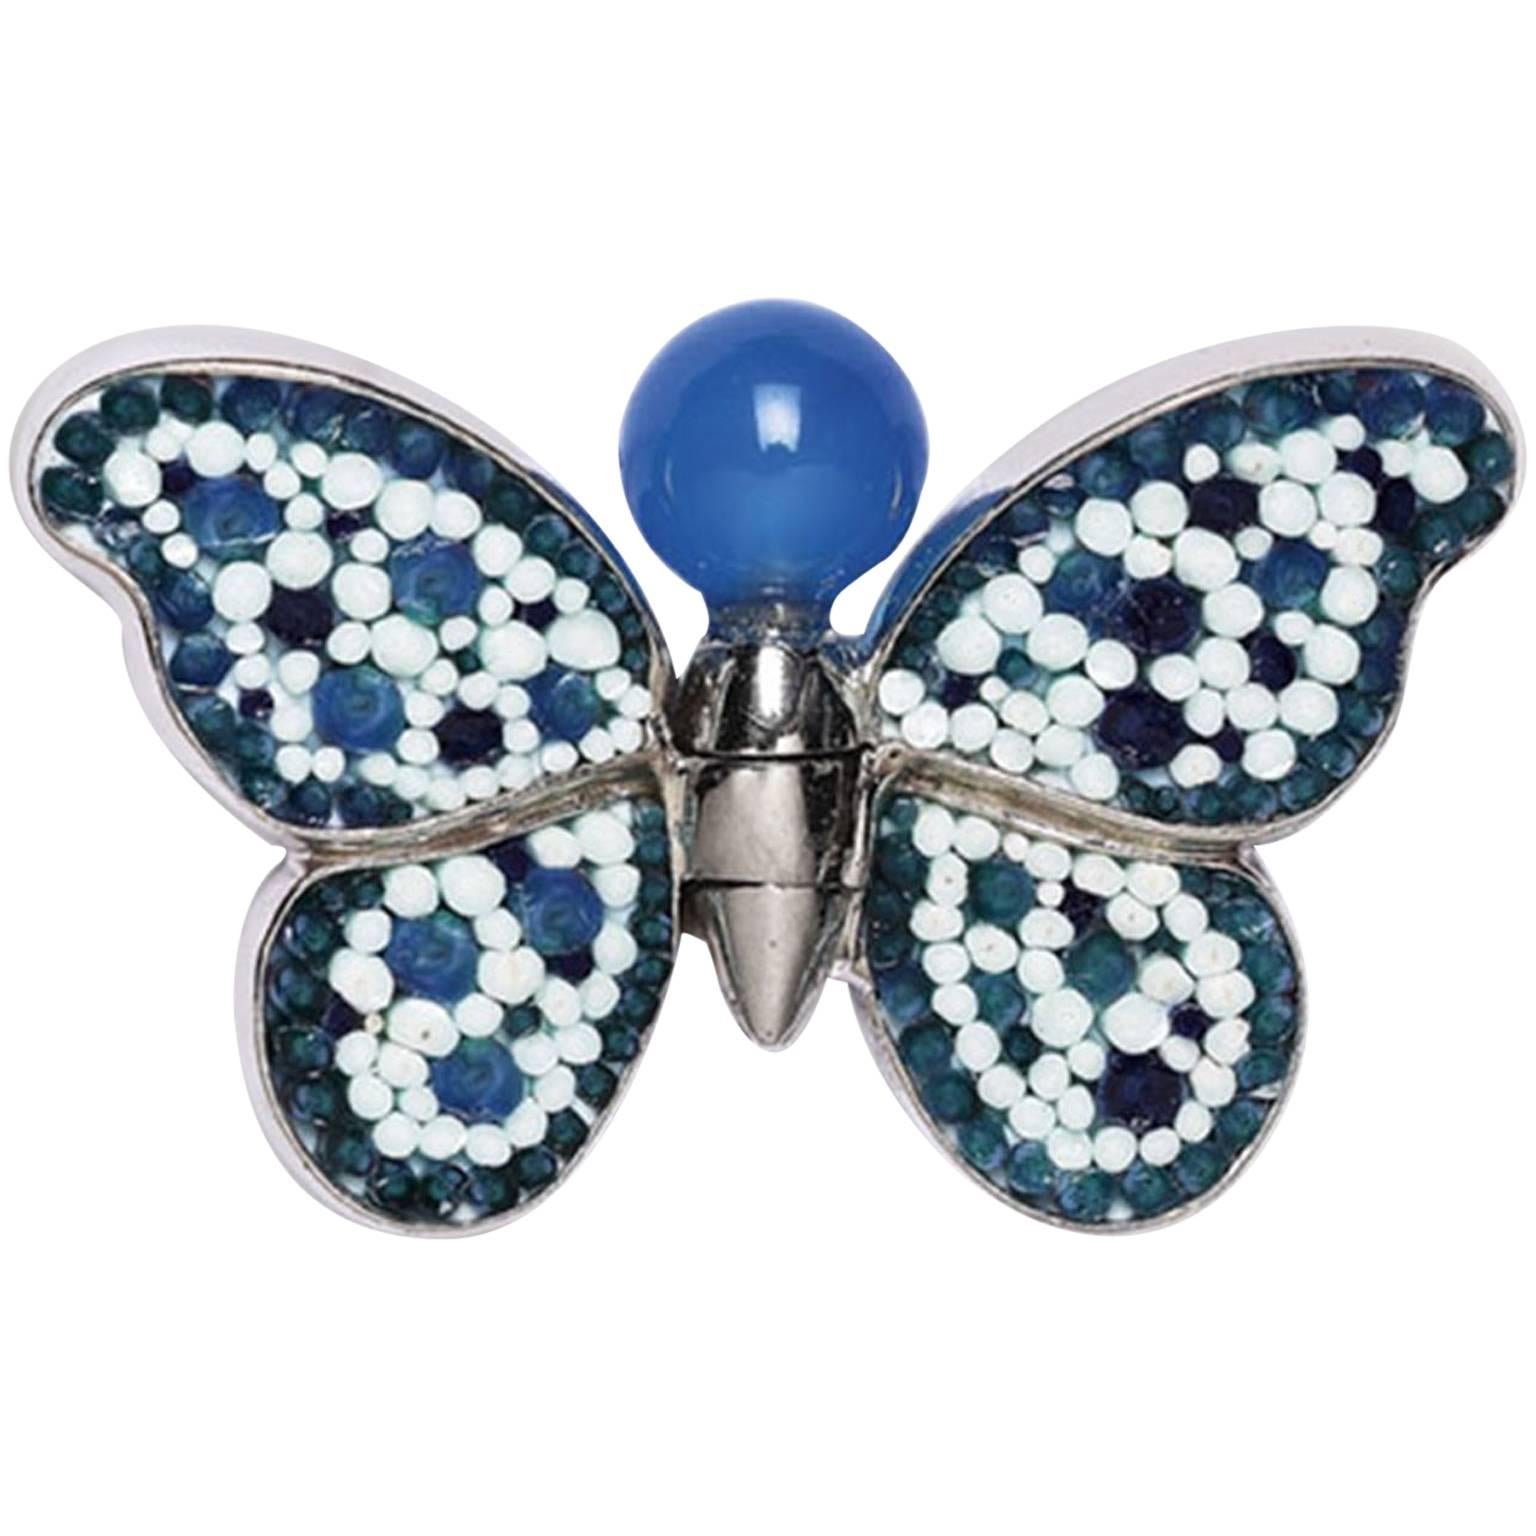 Stylish Butterfly Pin Jacket Silver Agate Hand Decorated with Micromosaic